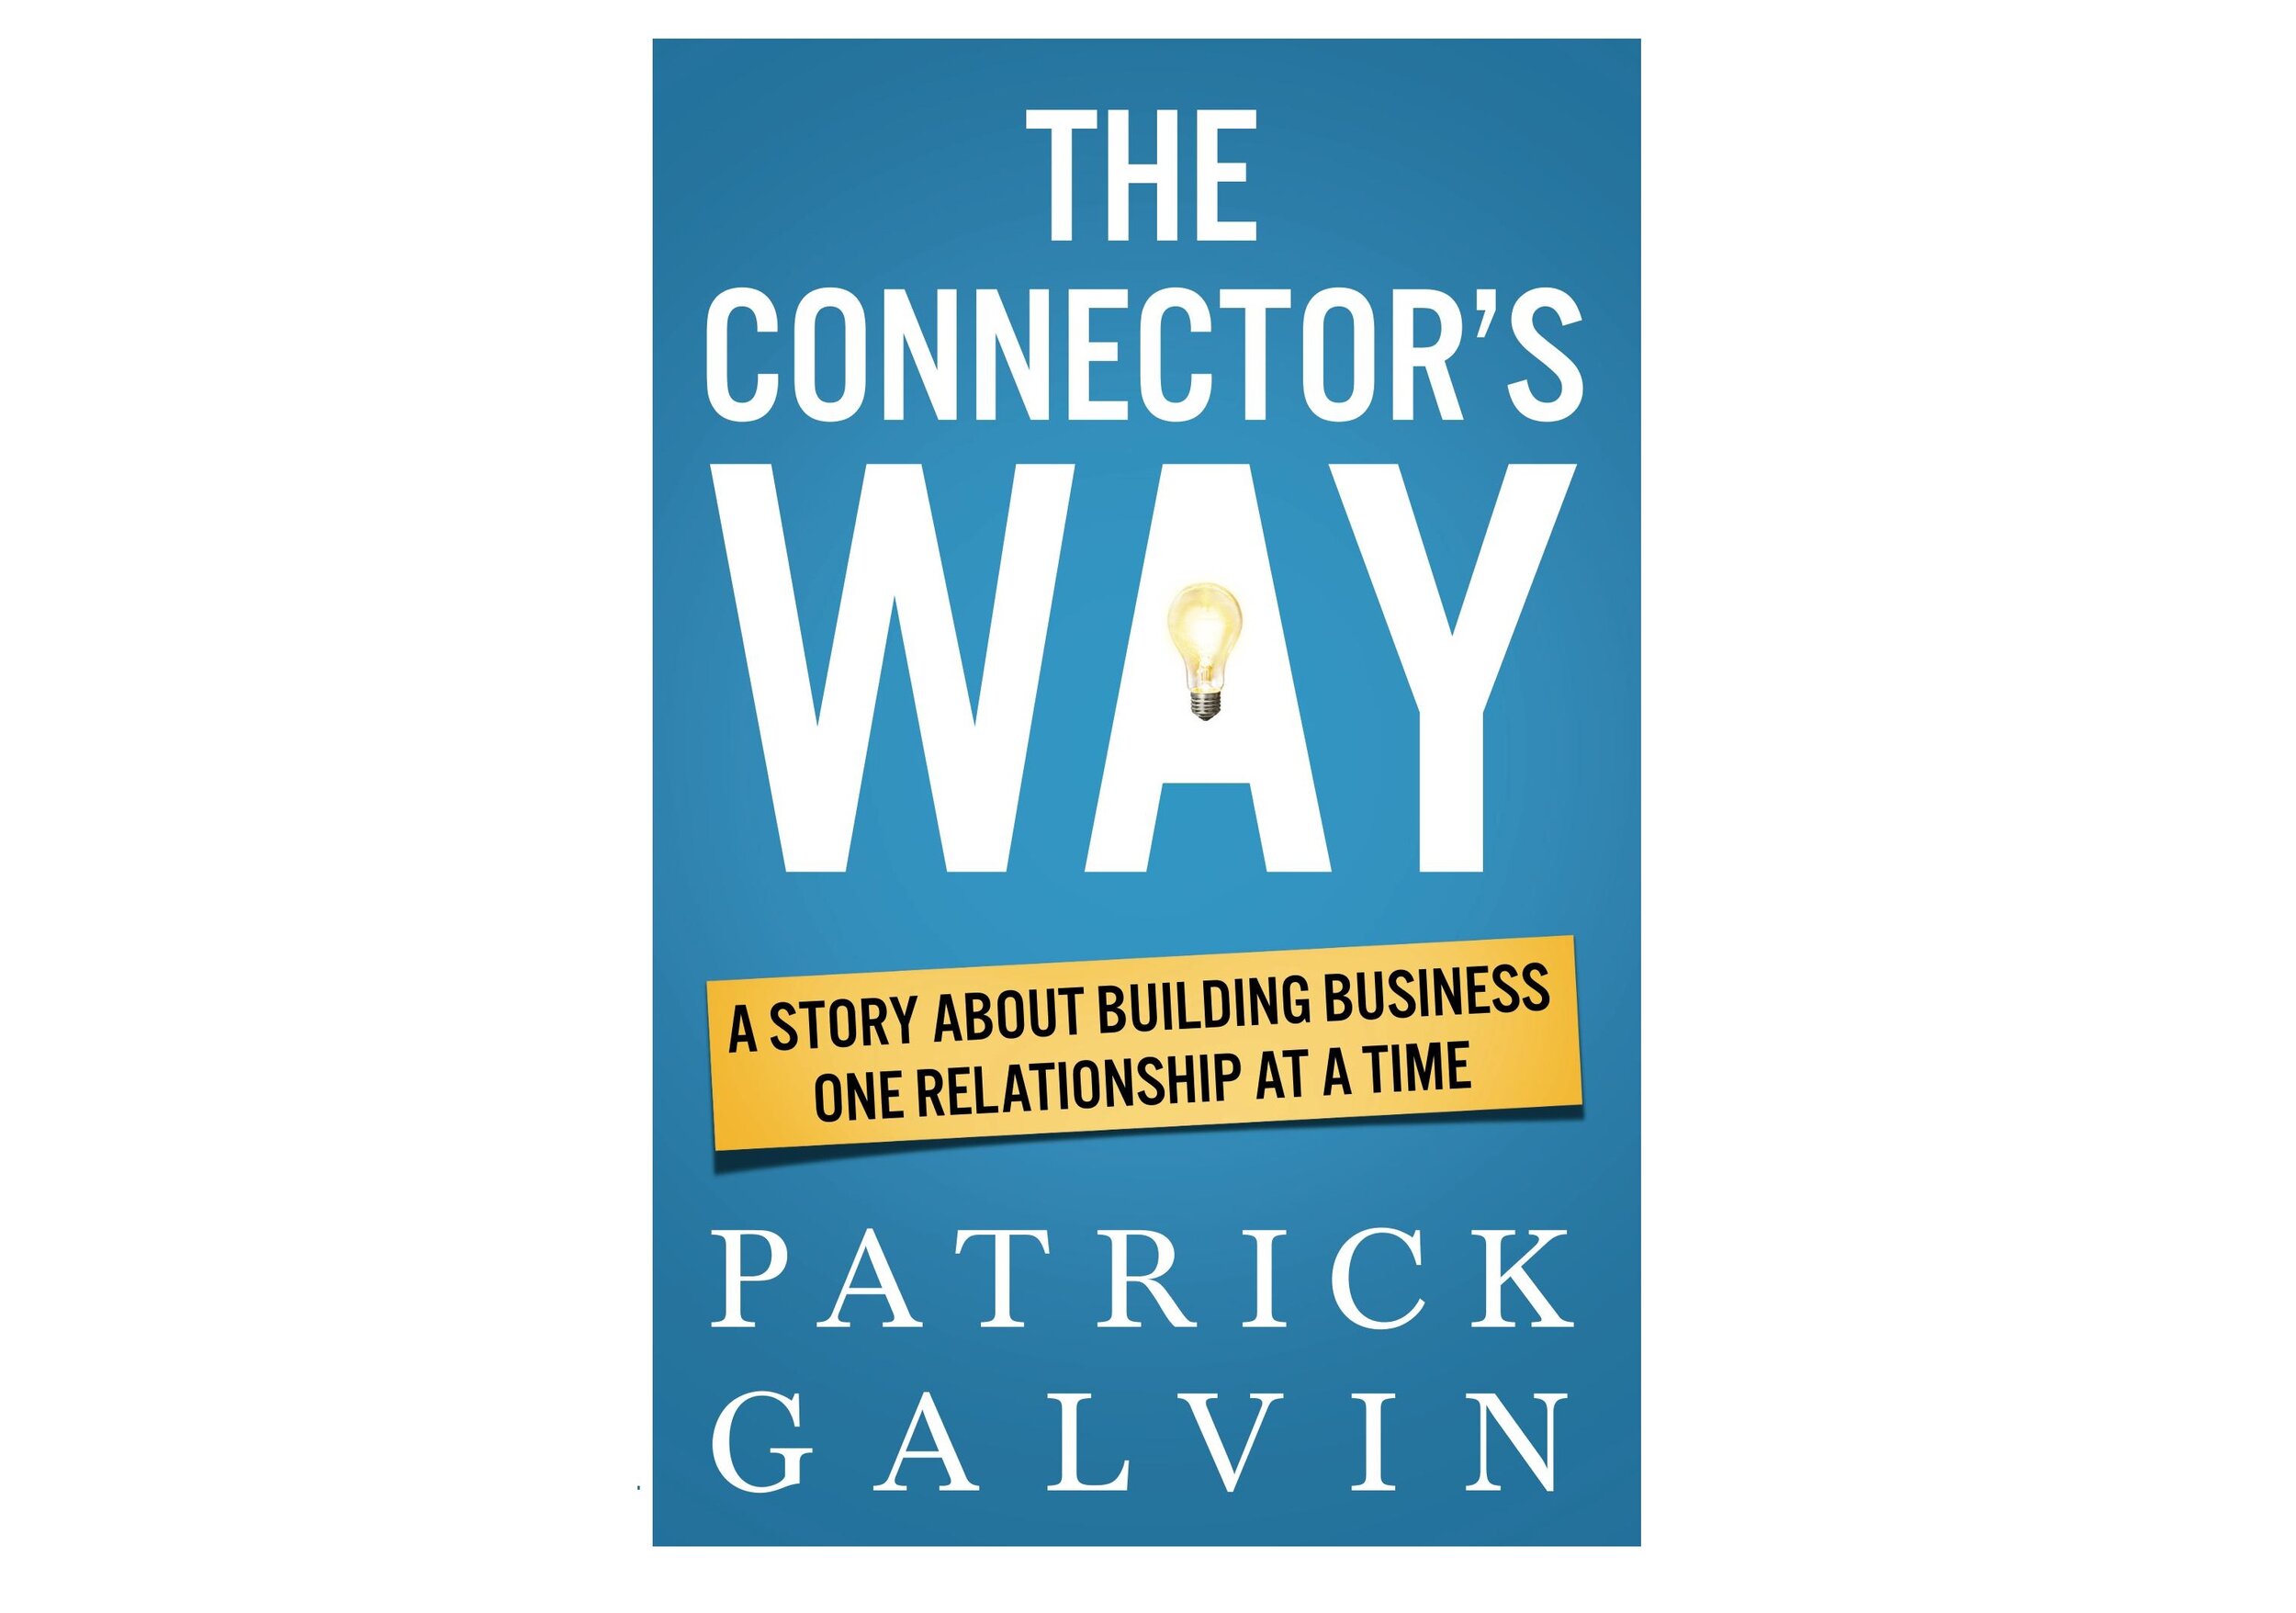 The Connector's Way by Patrick S Galvin (1).jpg